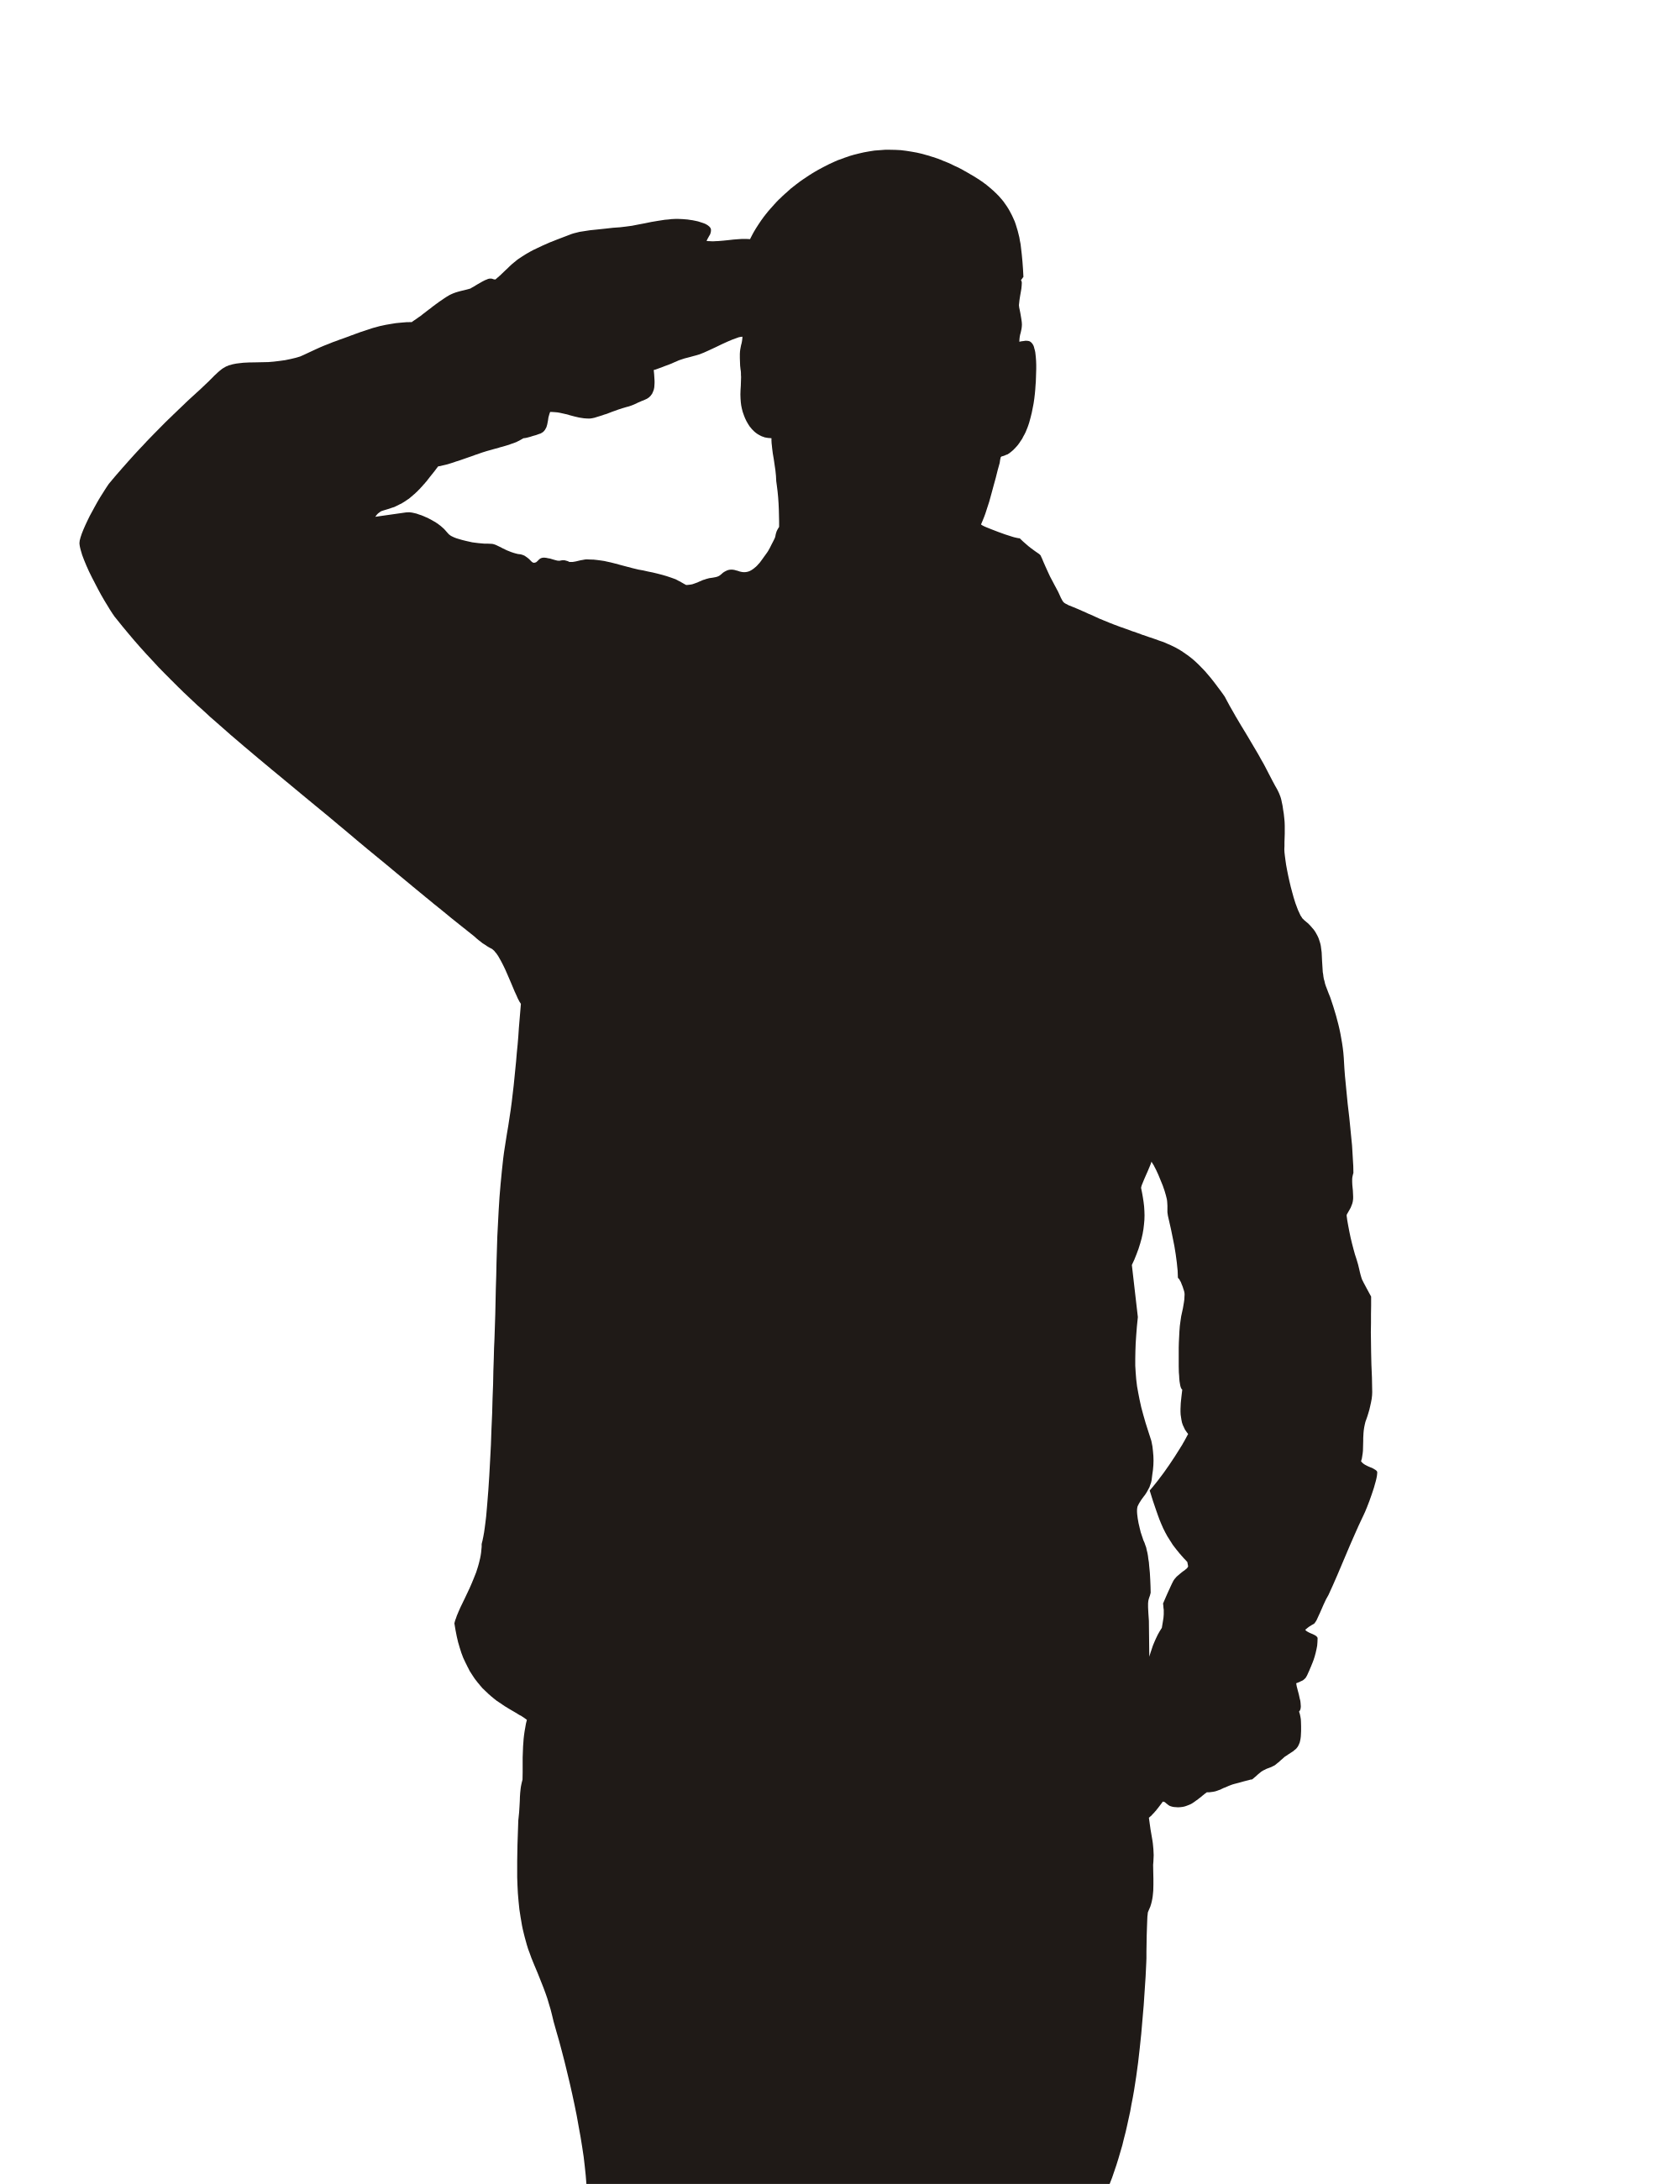 Salute Soldier Military Respect Clip art - Soldier png ... - Veteran Soldier Silhouette